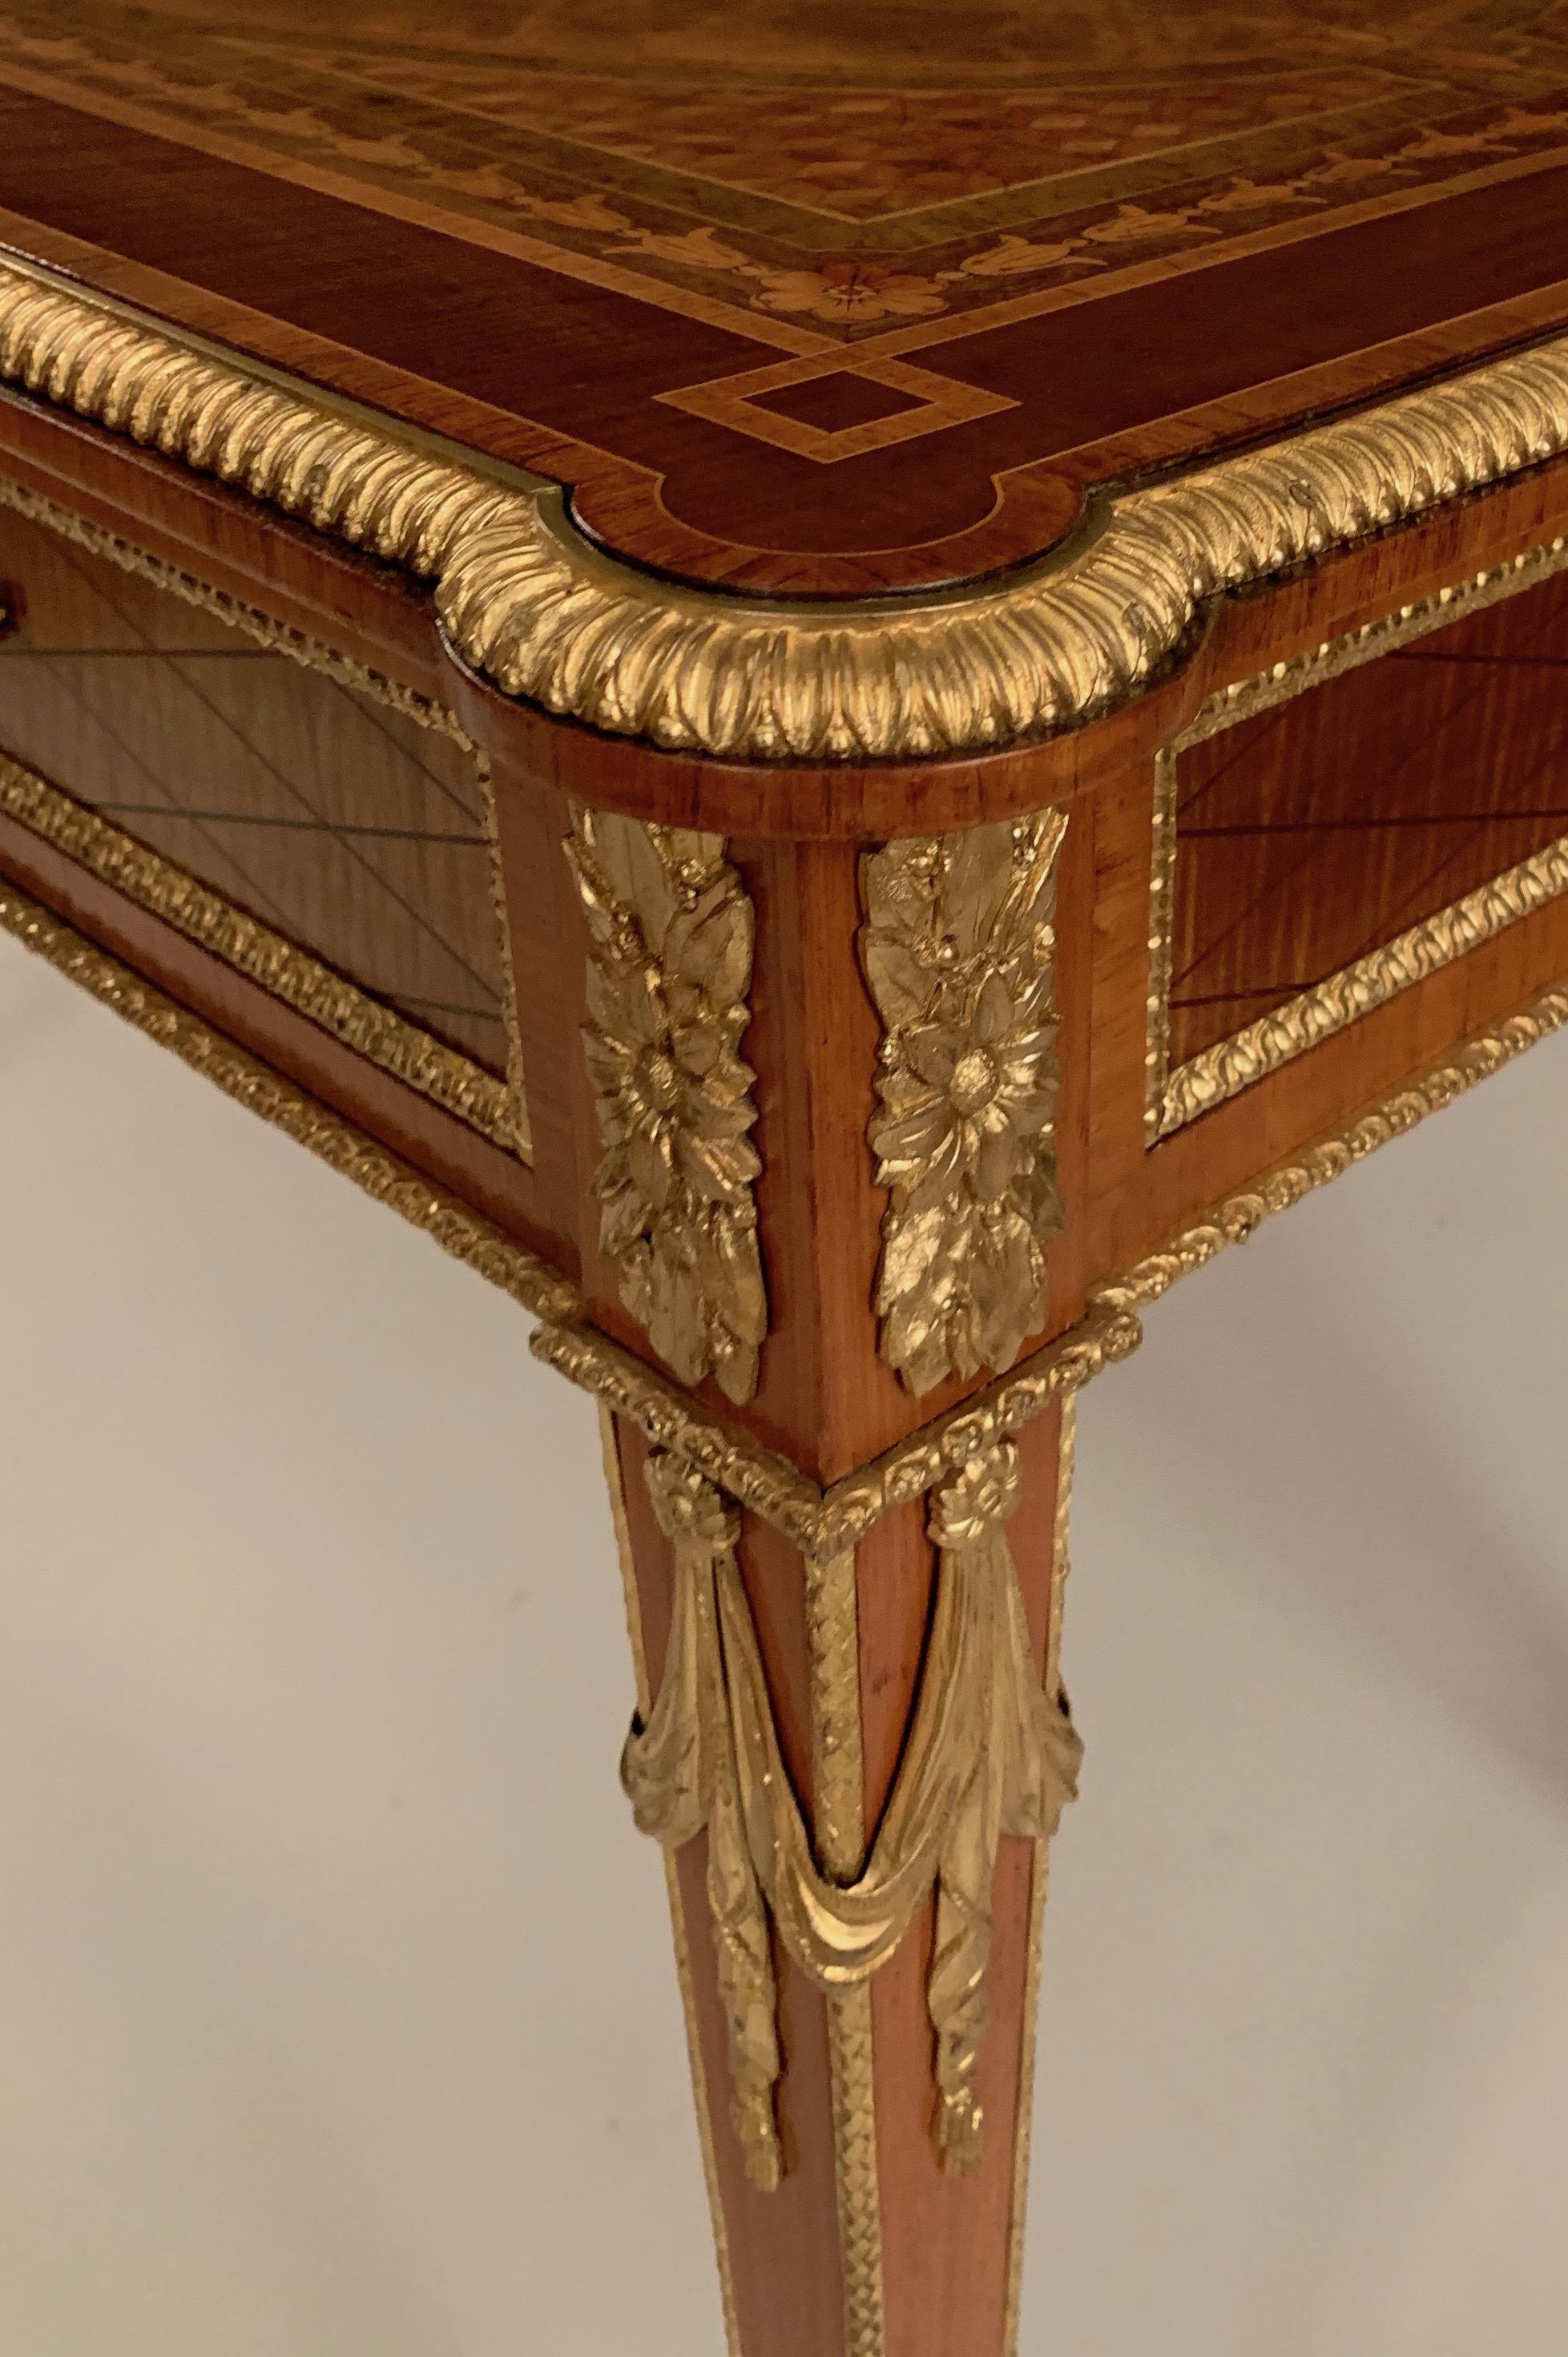 Gilt Antique Walnut, Ormolu, and Porcelain Table in the Louis XVI Style